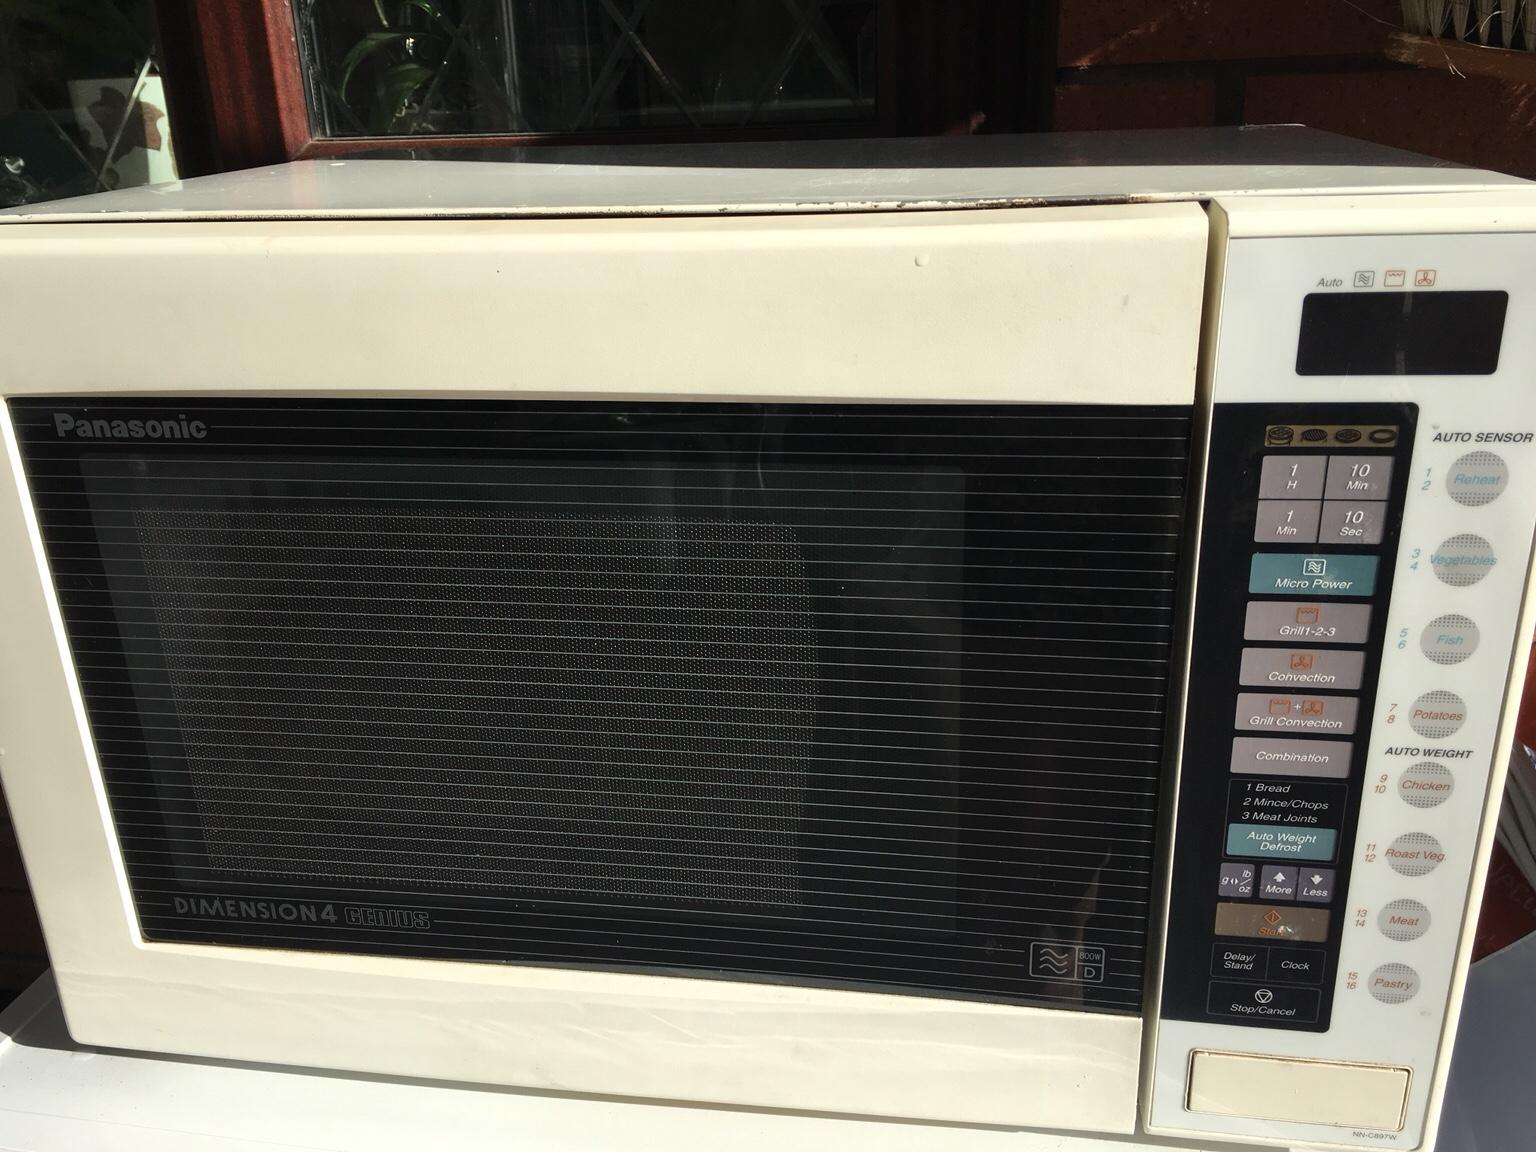 Panasonic Dimension 4 Genius Microwave in B97 Redditch for £20.00 for